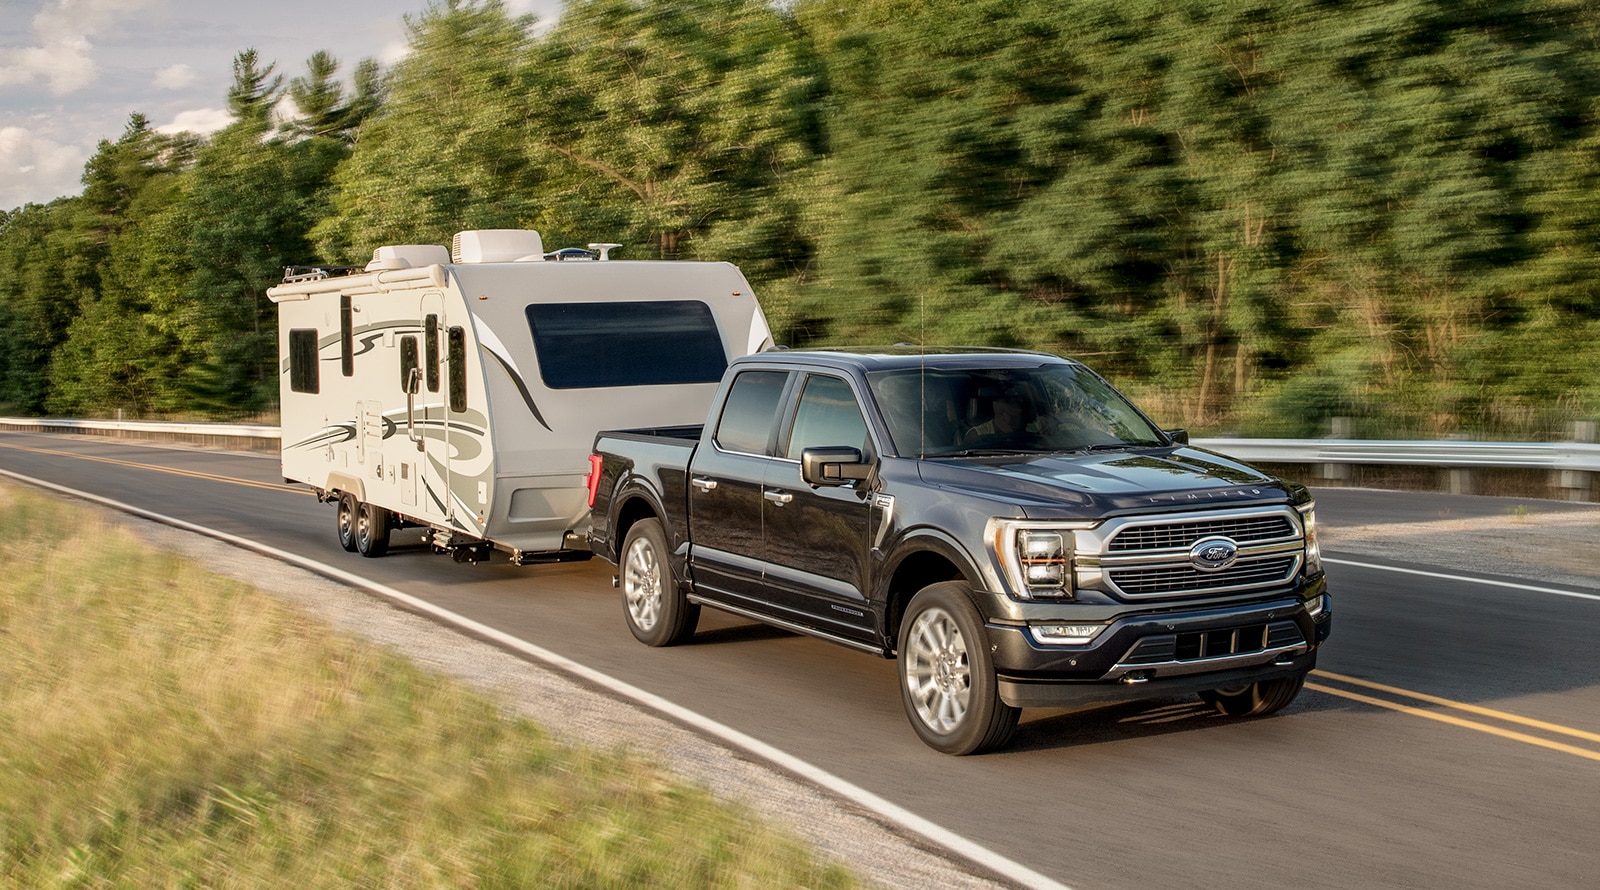 A Ford F-Series pickup truck towing a camper trailer on a highway.